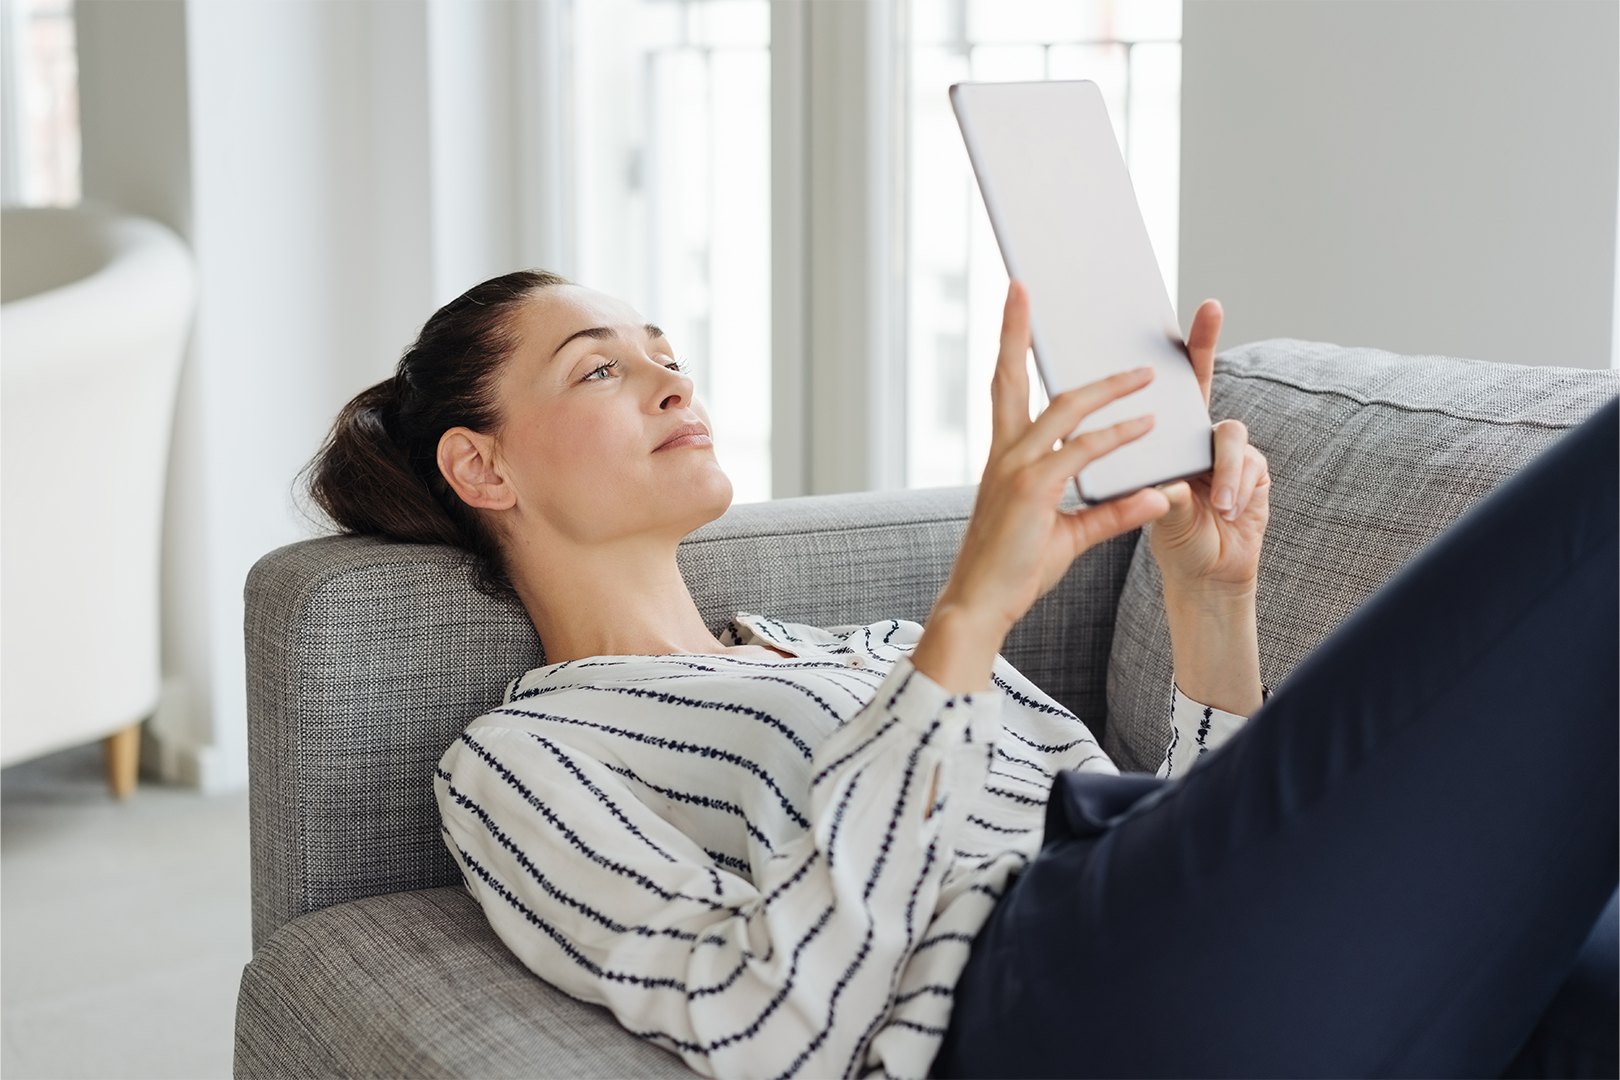 A woman in a striped shirt lying on a couch looking at a tablet